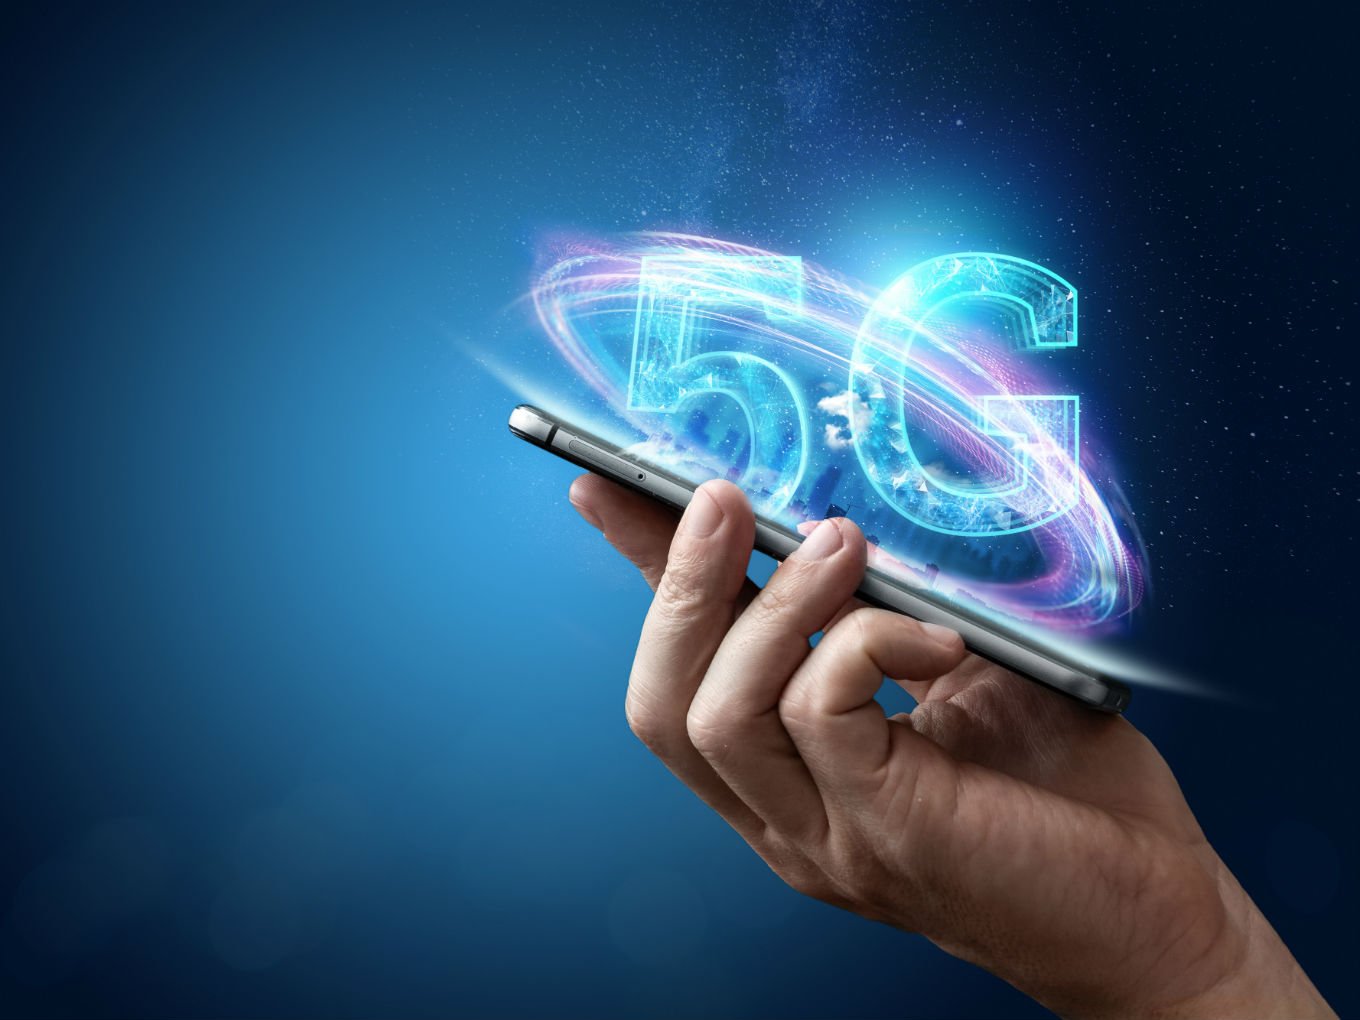 With 5G Phones Underway In 2020, Will Indian Manufacturers Lose Relevance?